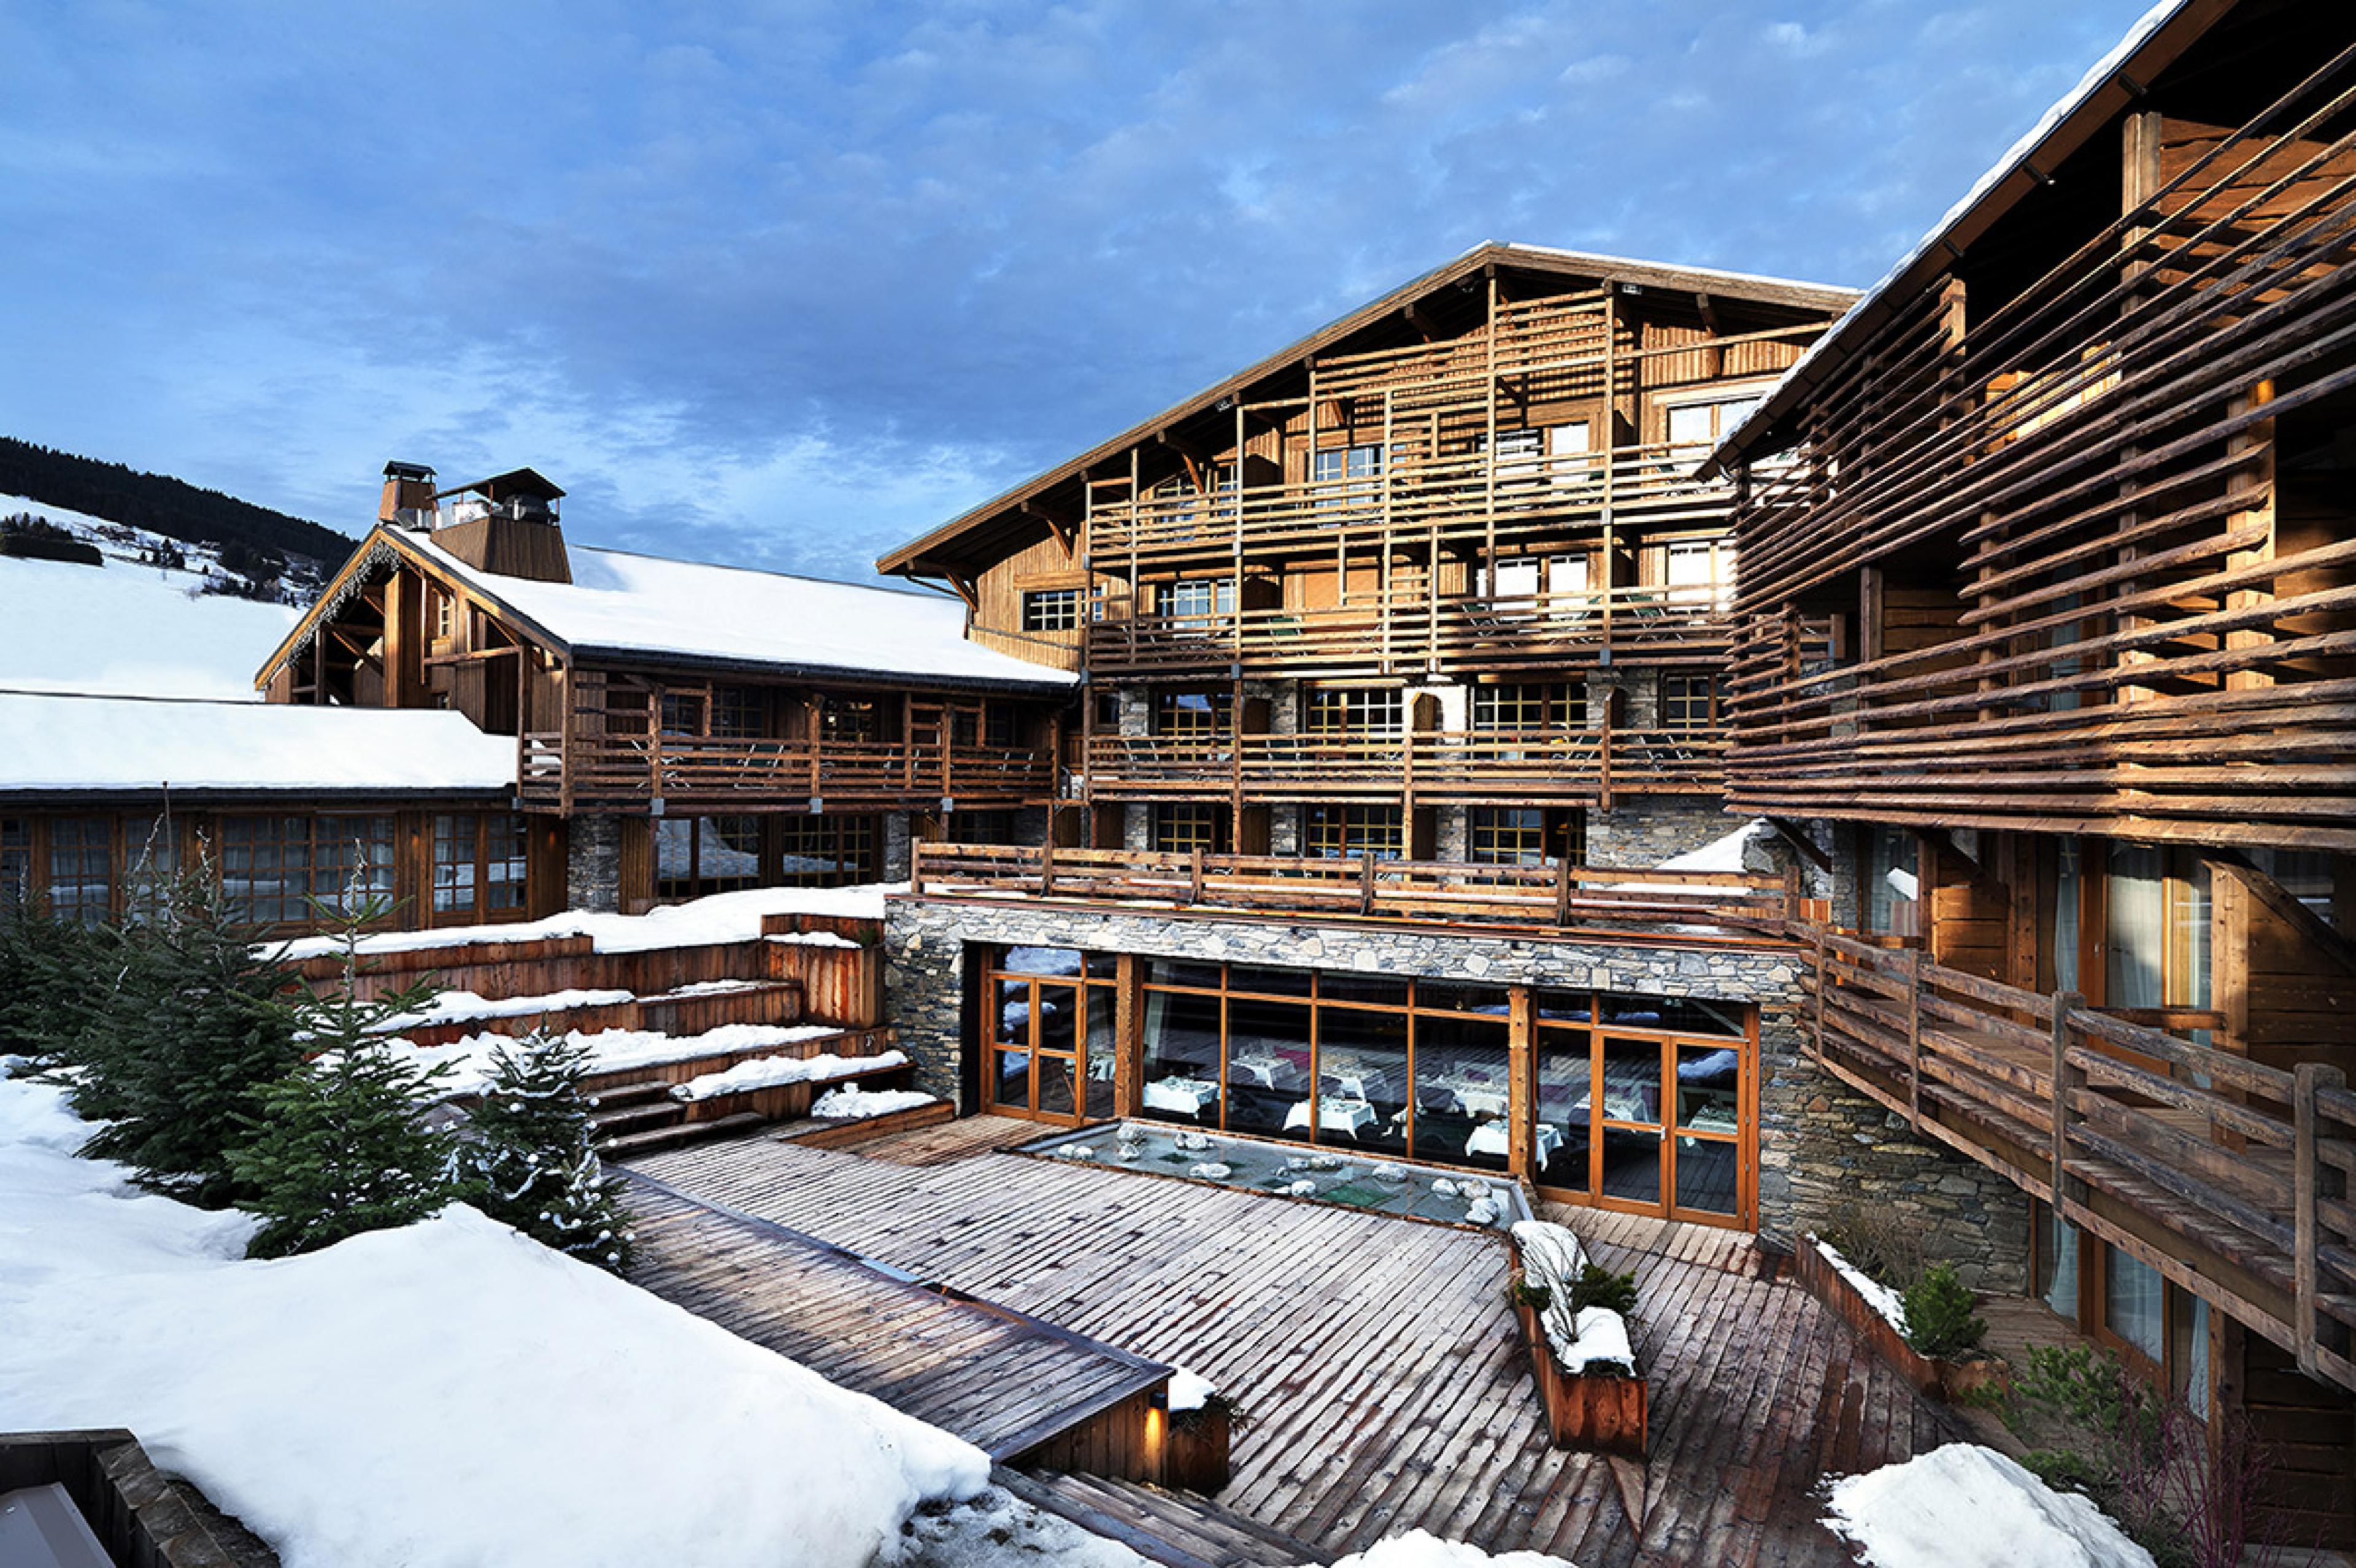 view of chalet hotel with wooden walls and a stone terrace, with a light dusting of snow on ground